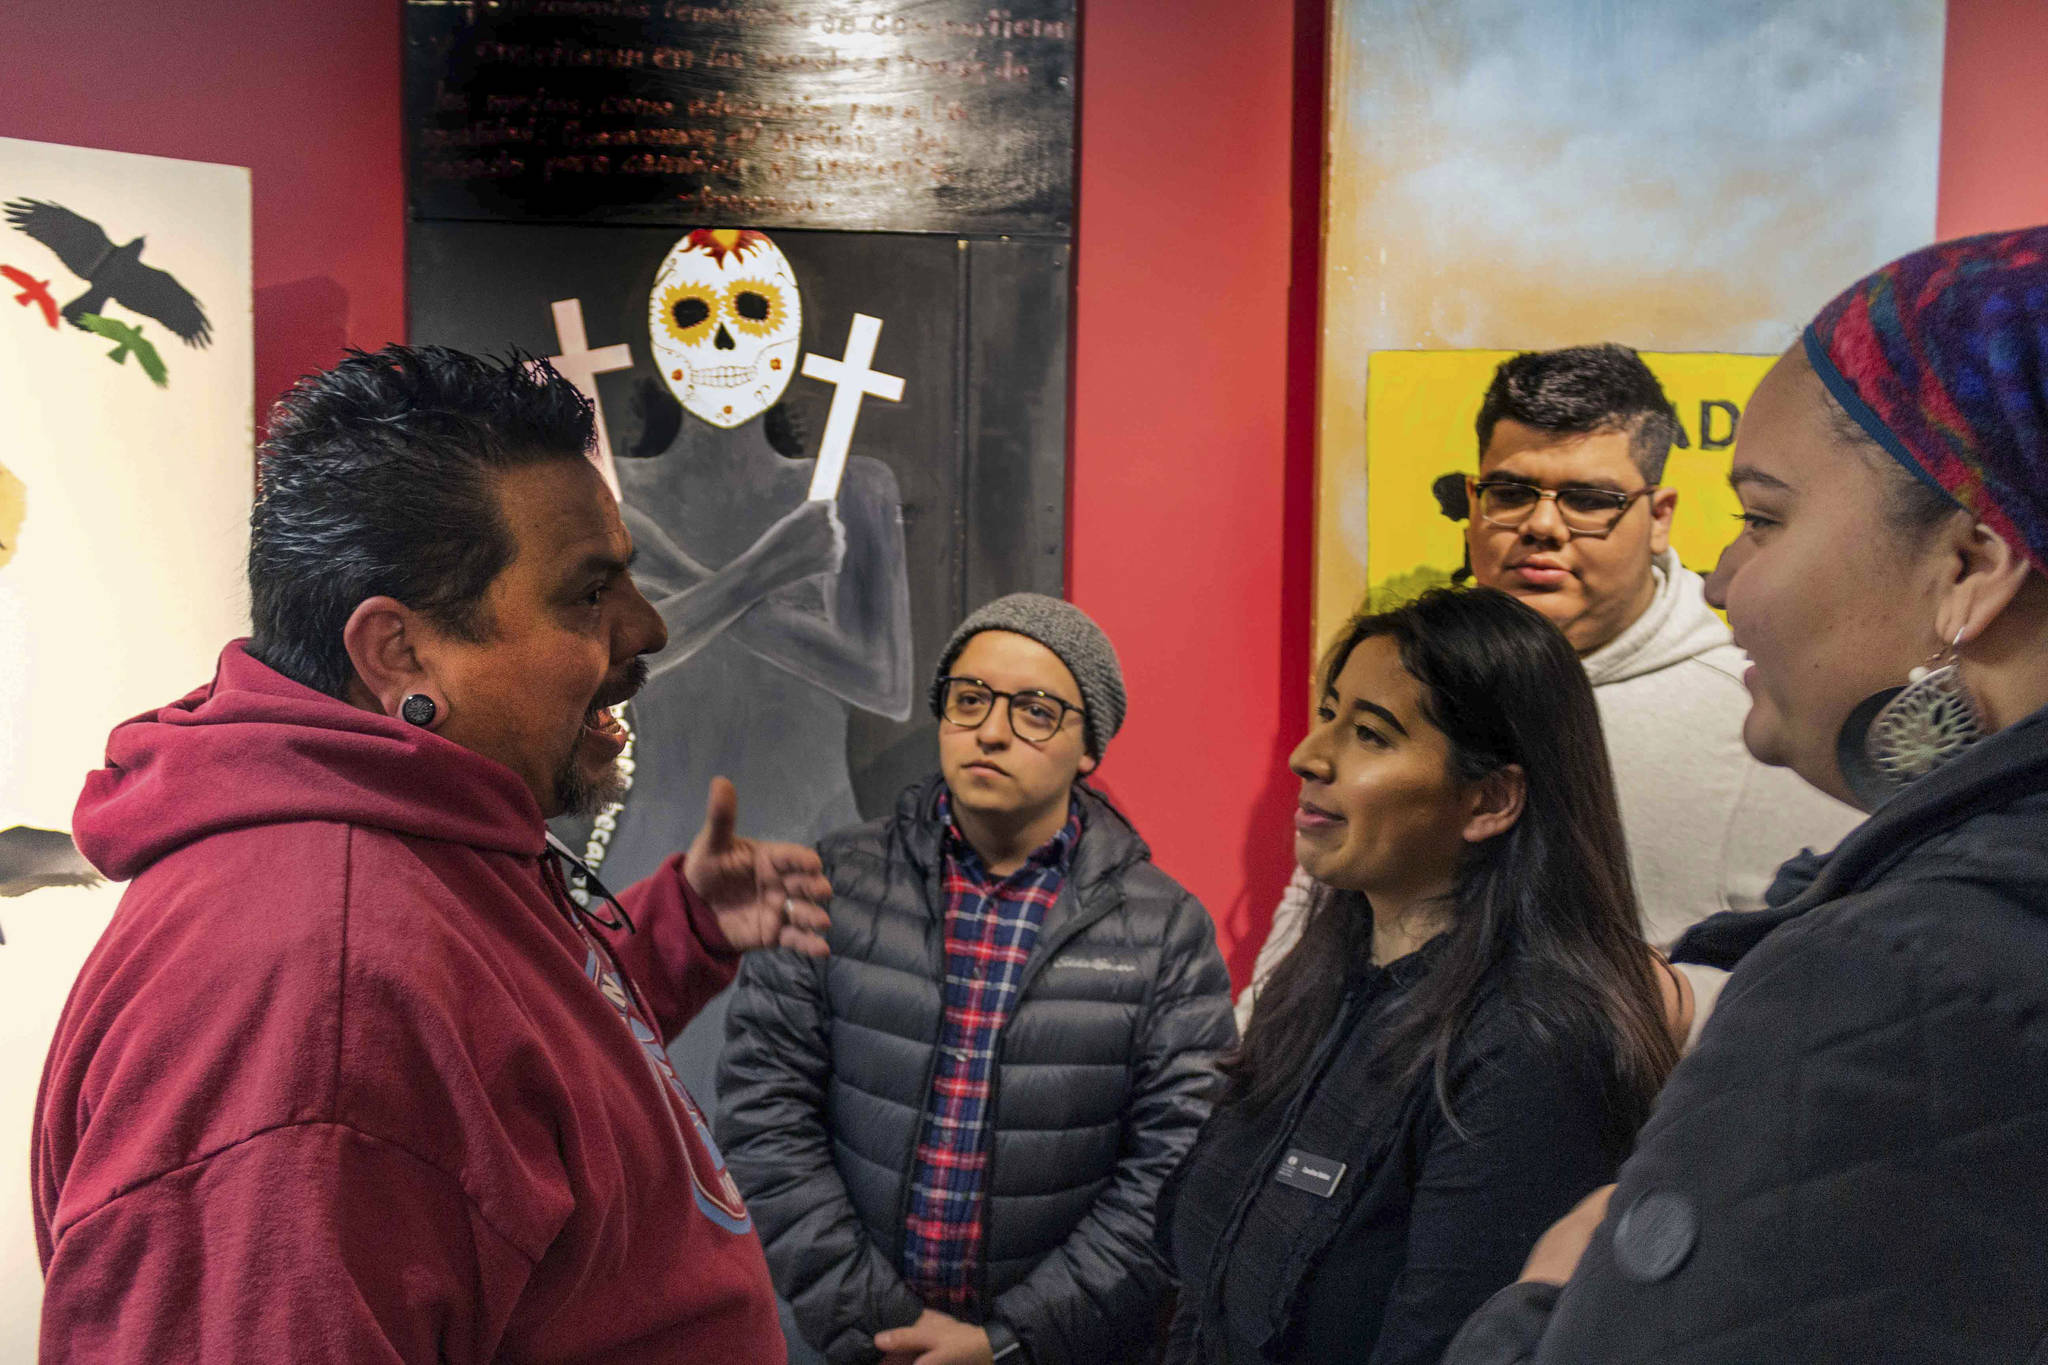 Claudio Pérez speaks with a group of students at the opening reception for the “Border Doors” exhibit at Centro Cultural Mexicano. Photo courtesy of Centro Cultural Mexicano